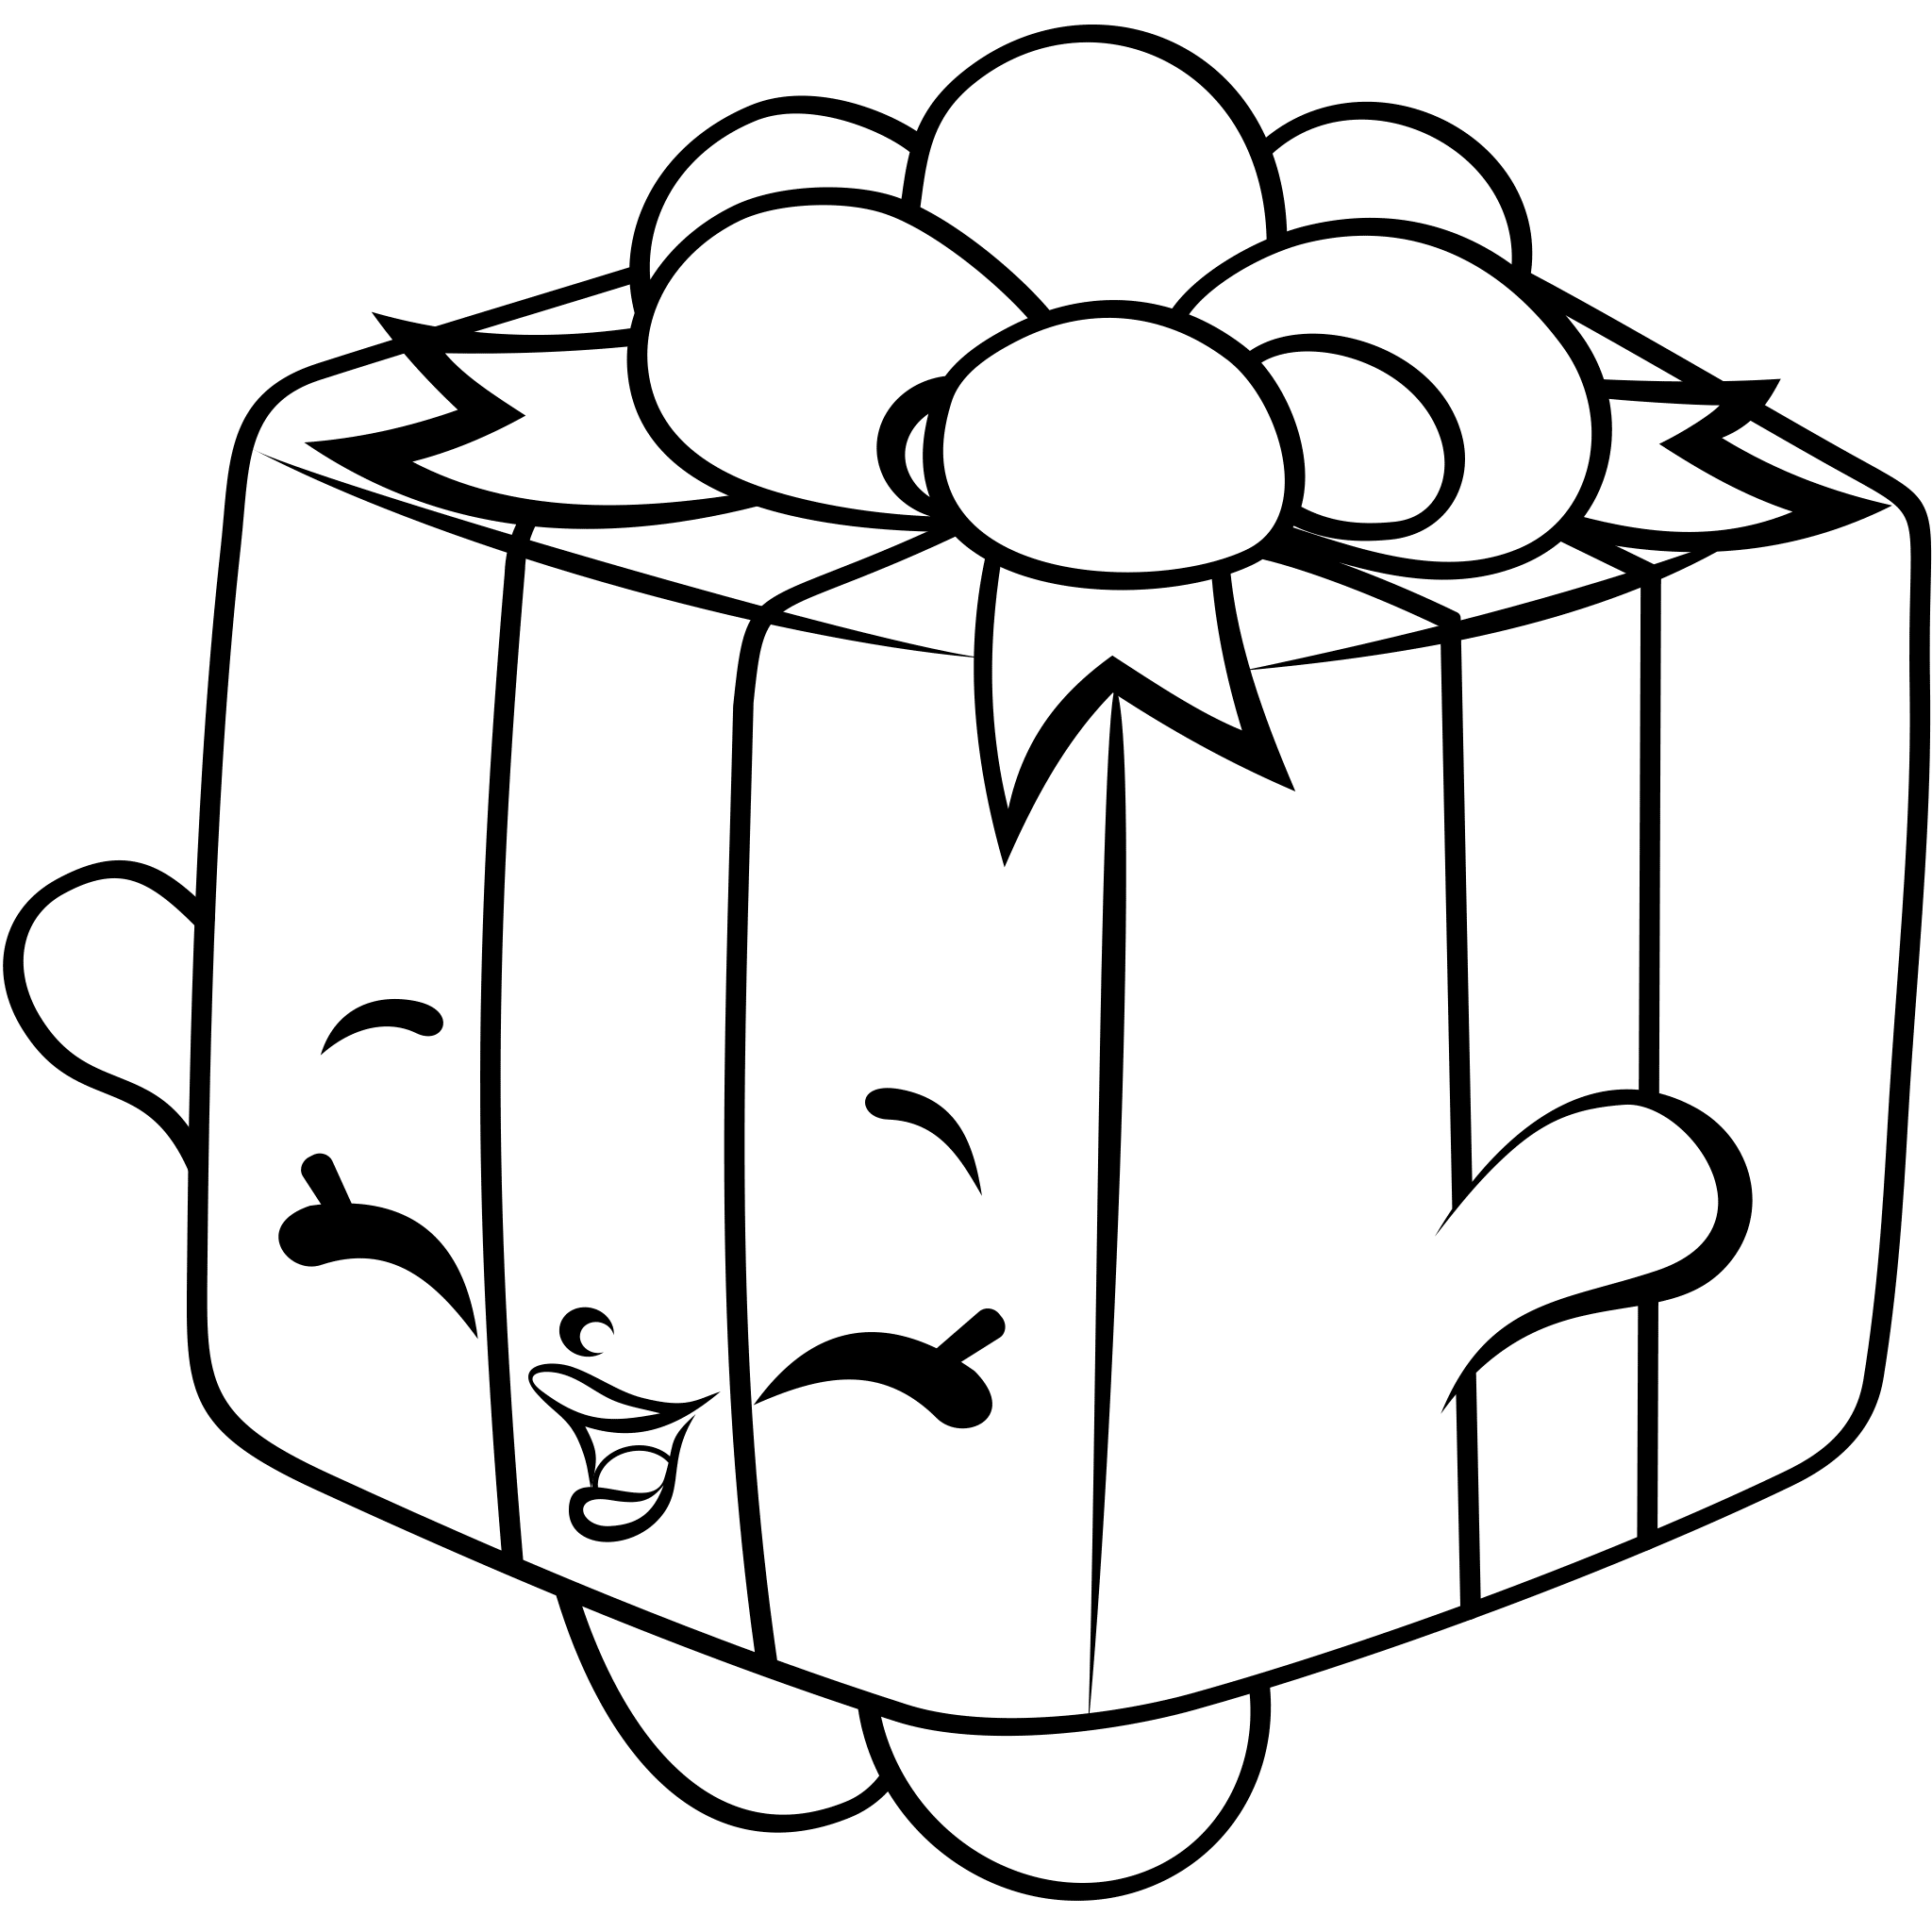 Shopkins Coloring Pages - Miss Pressy